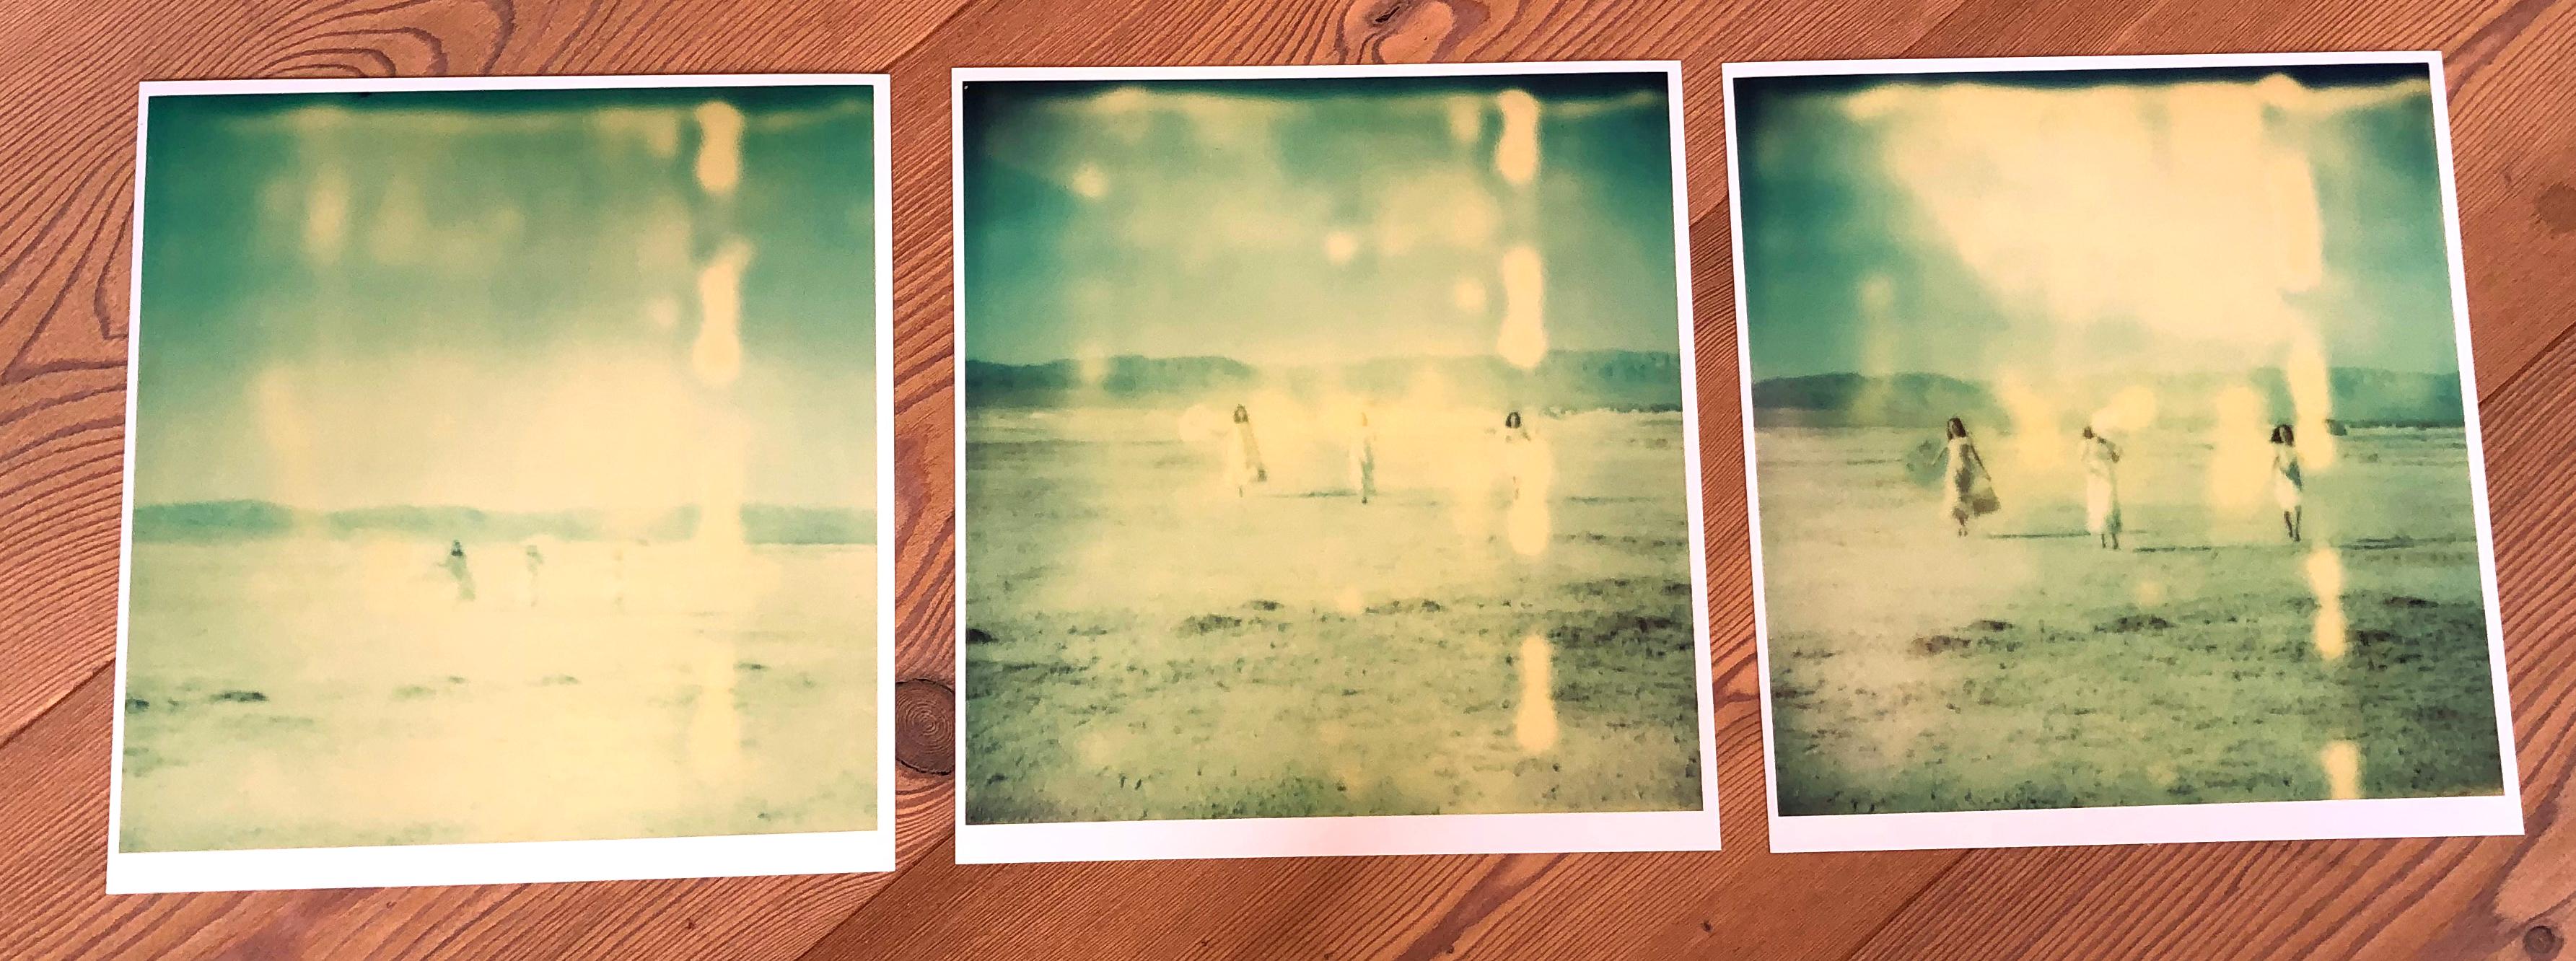 'Enchanted' (Dream Scene on Salt Lake), triptych, from the 29 Palms, CA Project

Edition of 10, 
each 20x20cm, together 20x70cm (installed), 
3 archival C-Prints, based on 3 Polaroids.  
Certificate and Signature label. 
Artist Inventory #9635. 
Not